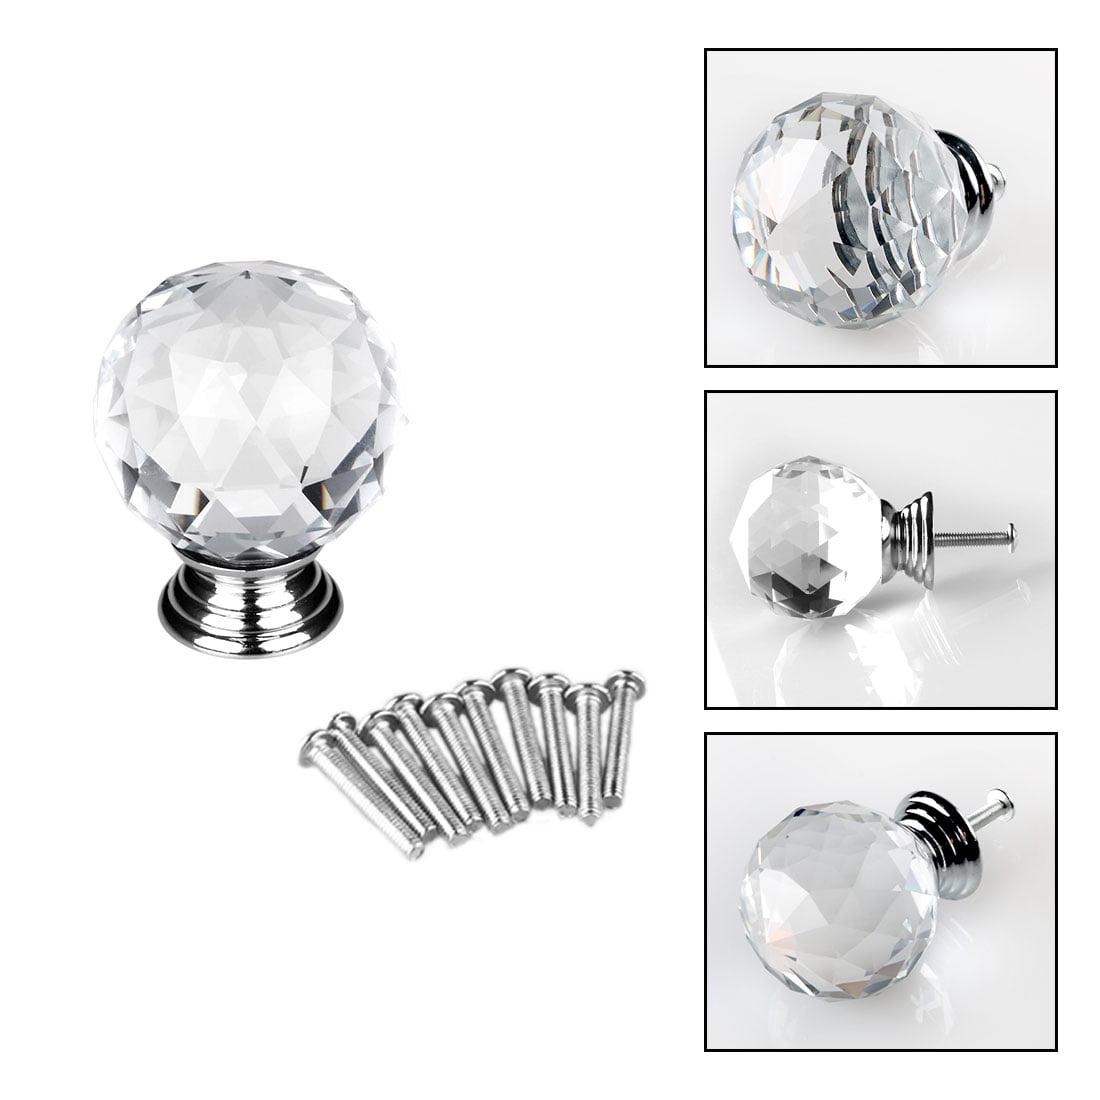 30mm Glass Ice Crackle Ball Shaped Dresser Drawer Pulls for Kitchen Batchroom Bedroom Purple LONGWIN 10 Pack Crystal Cabinet Knobs Handles